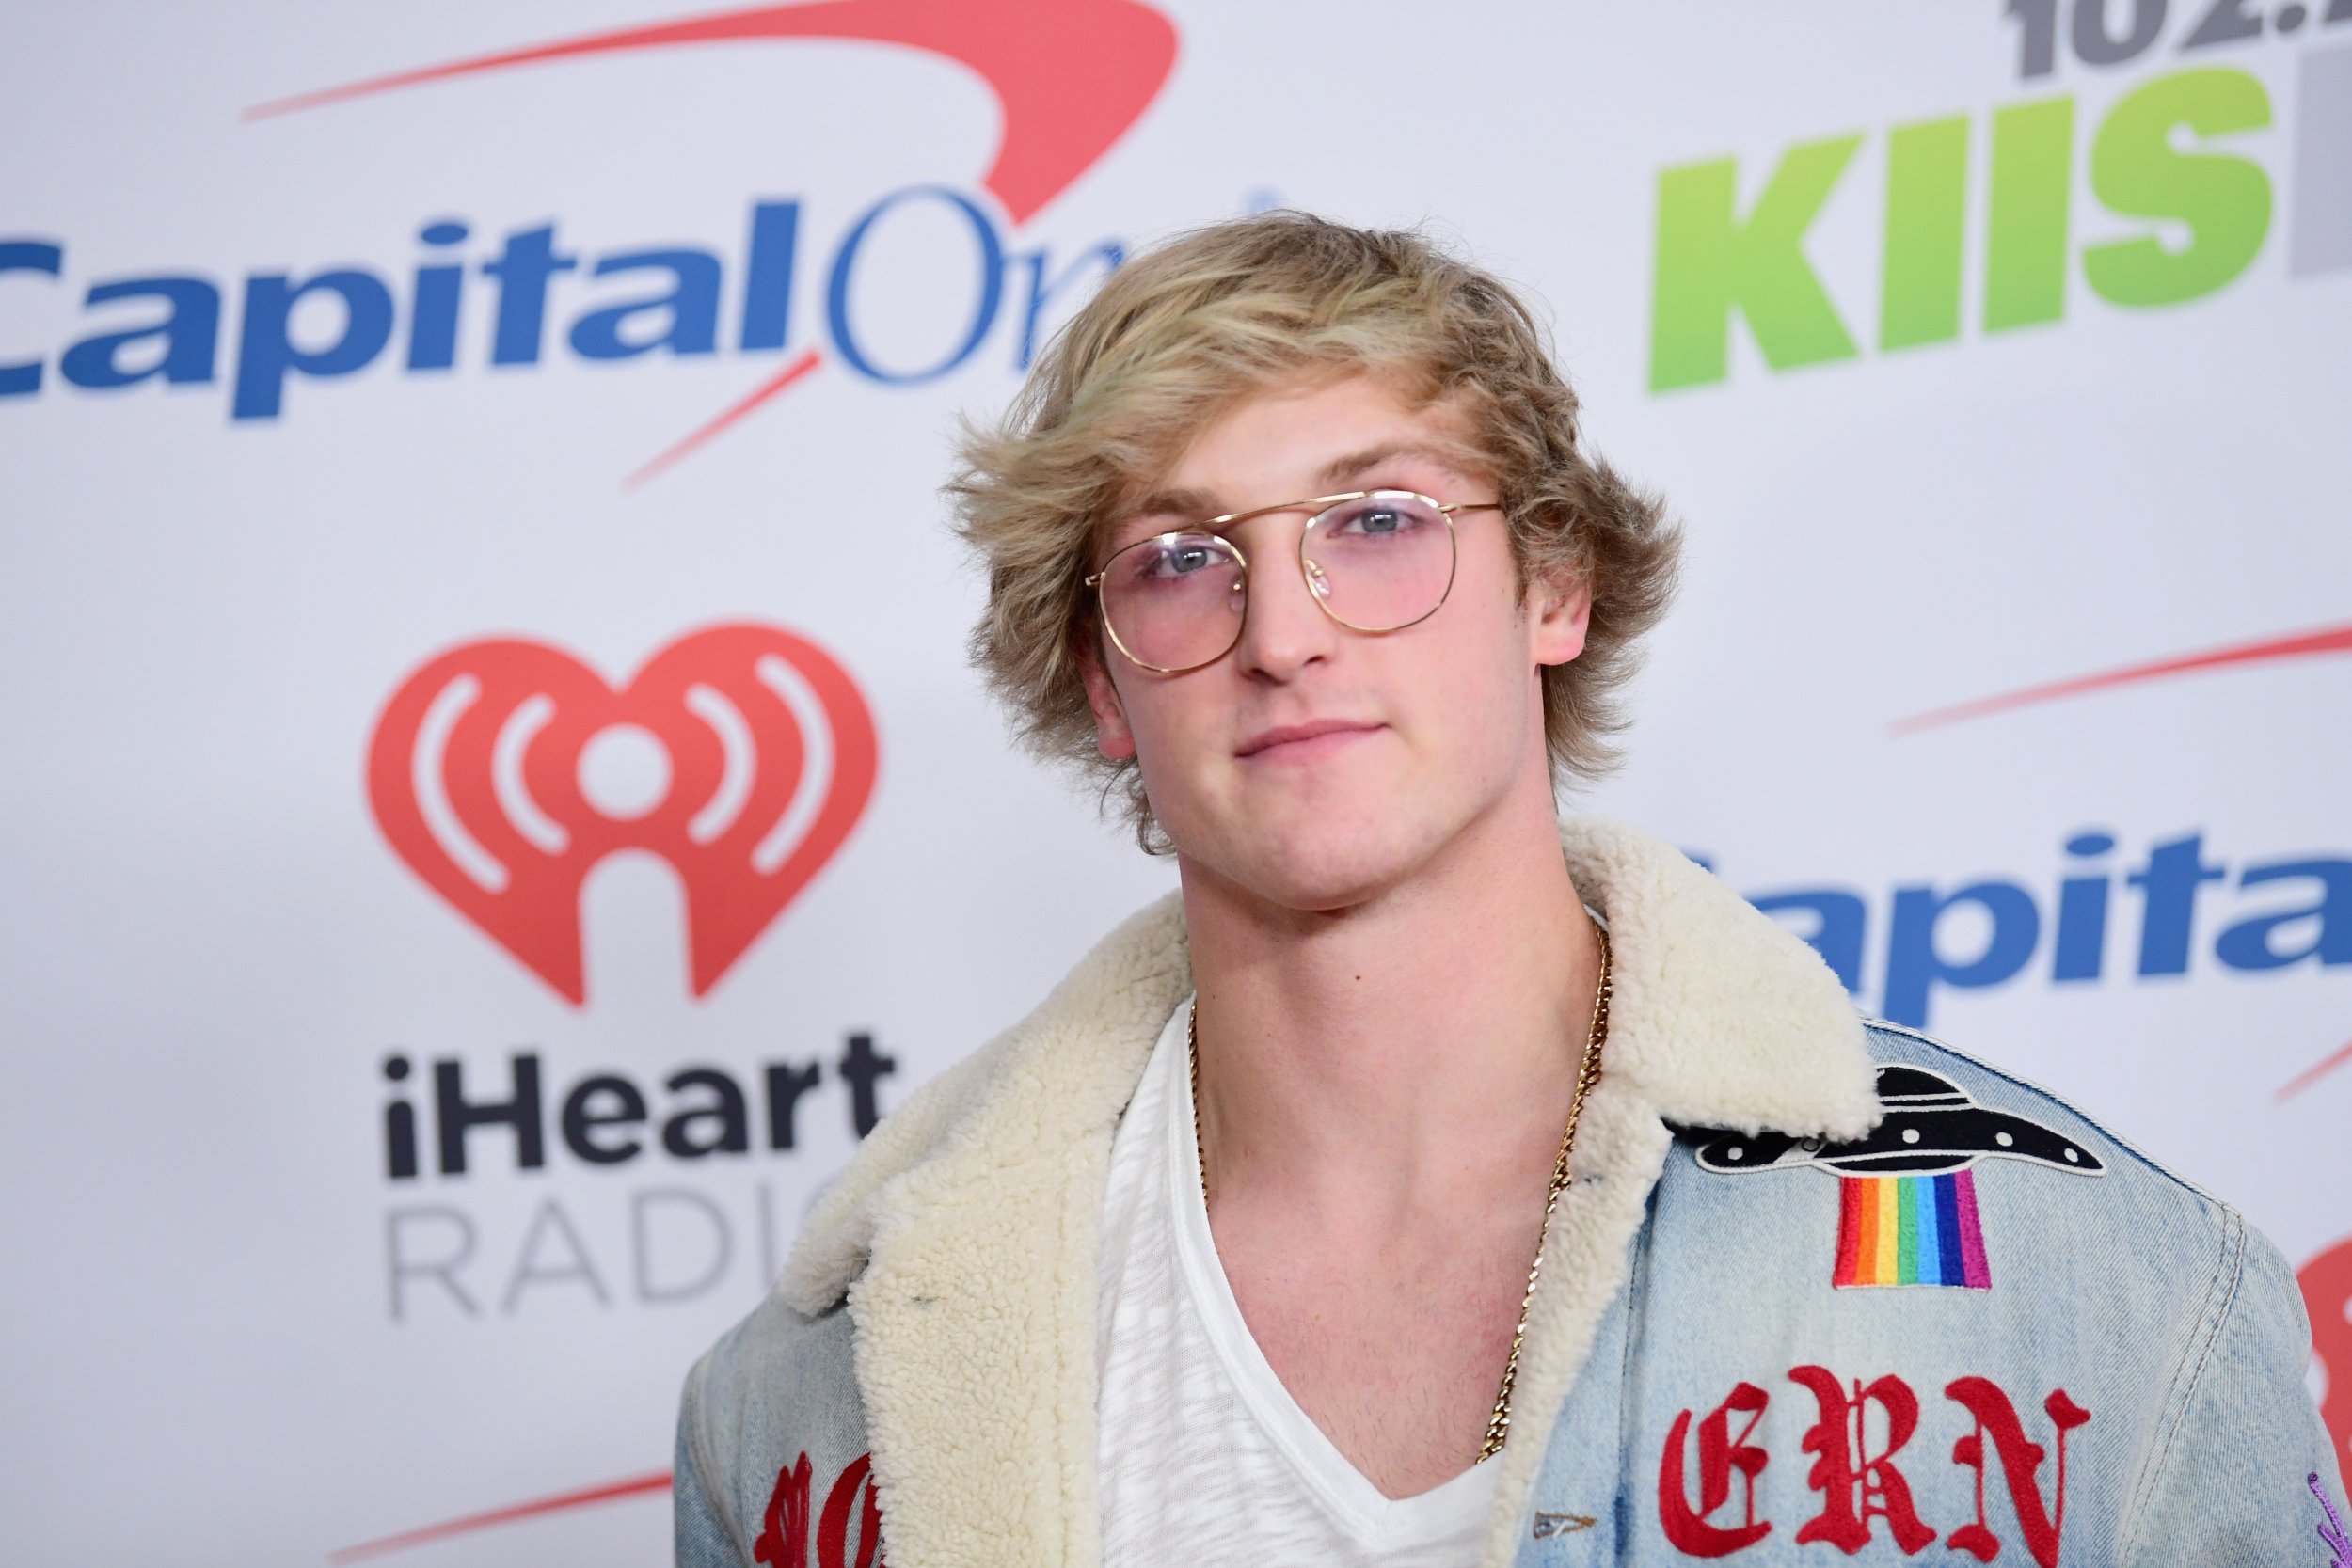 Logan Paul Apology Over Suicide Video - Logan Paul Youtube , HD Wallpaper & Backgrounds